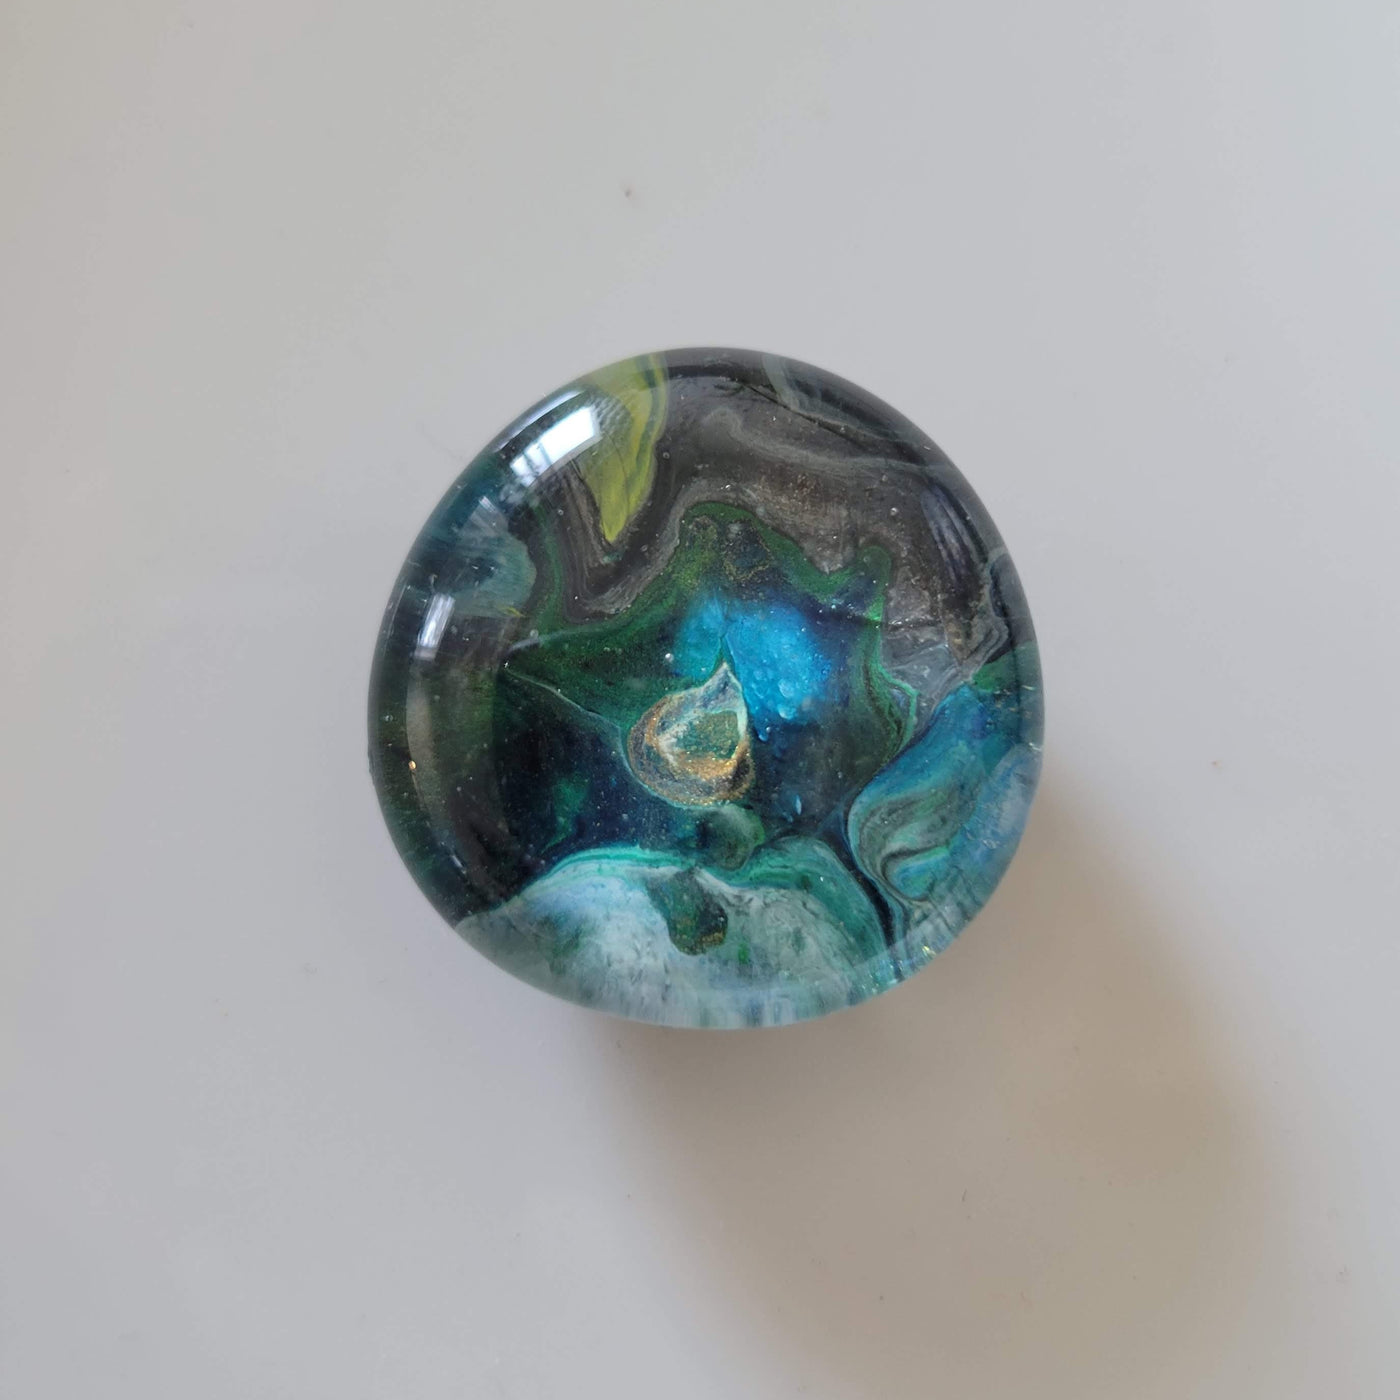 hand-painted circular glass magnet with shades of blue and green swirled